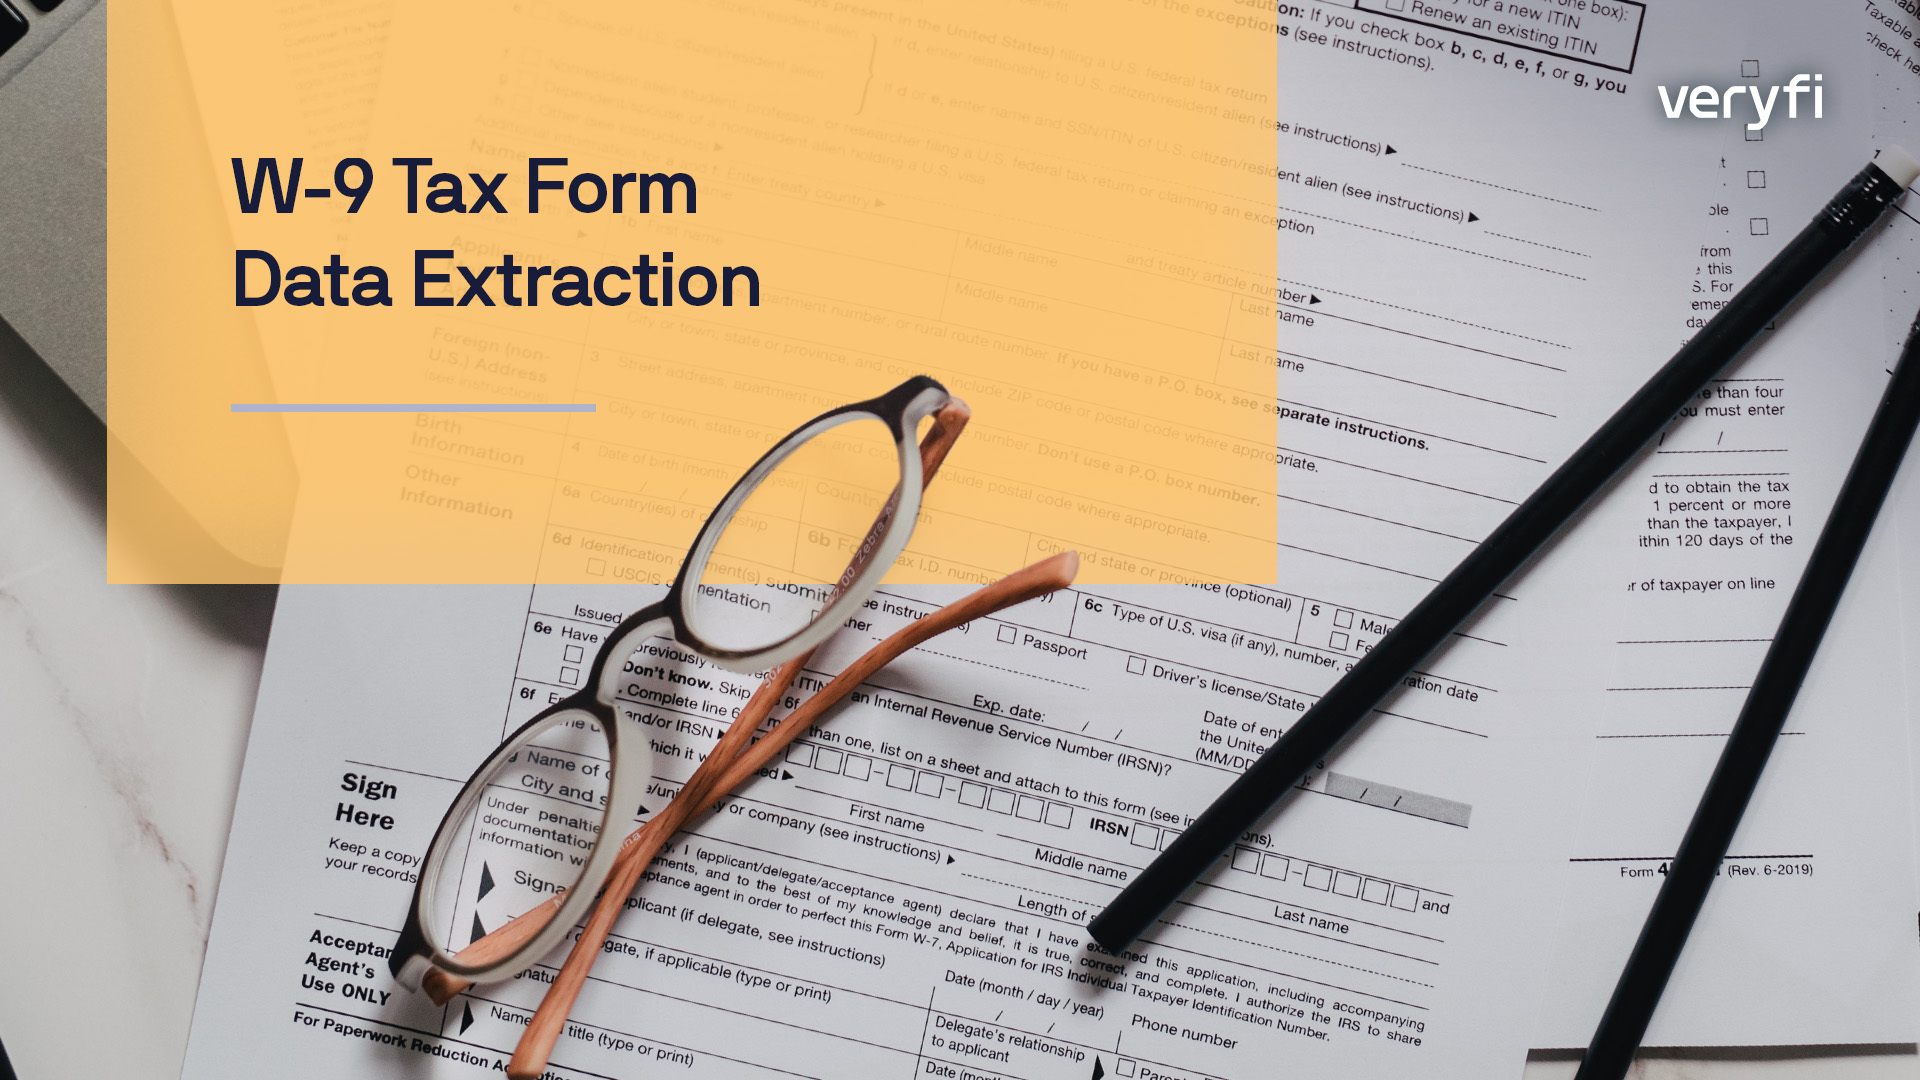 Some tax form documents on a desk with a pair of reading glasses and pen.